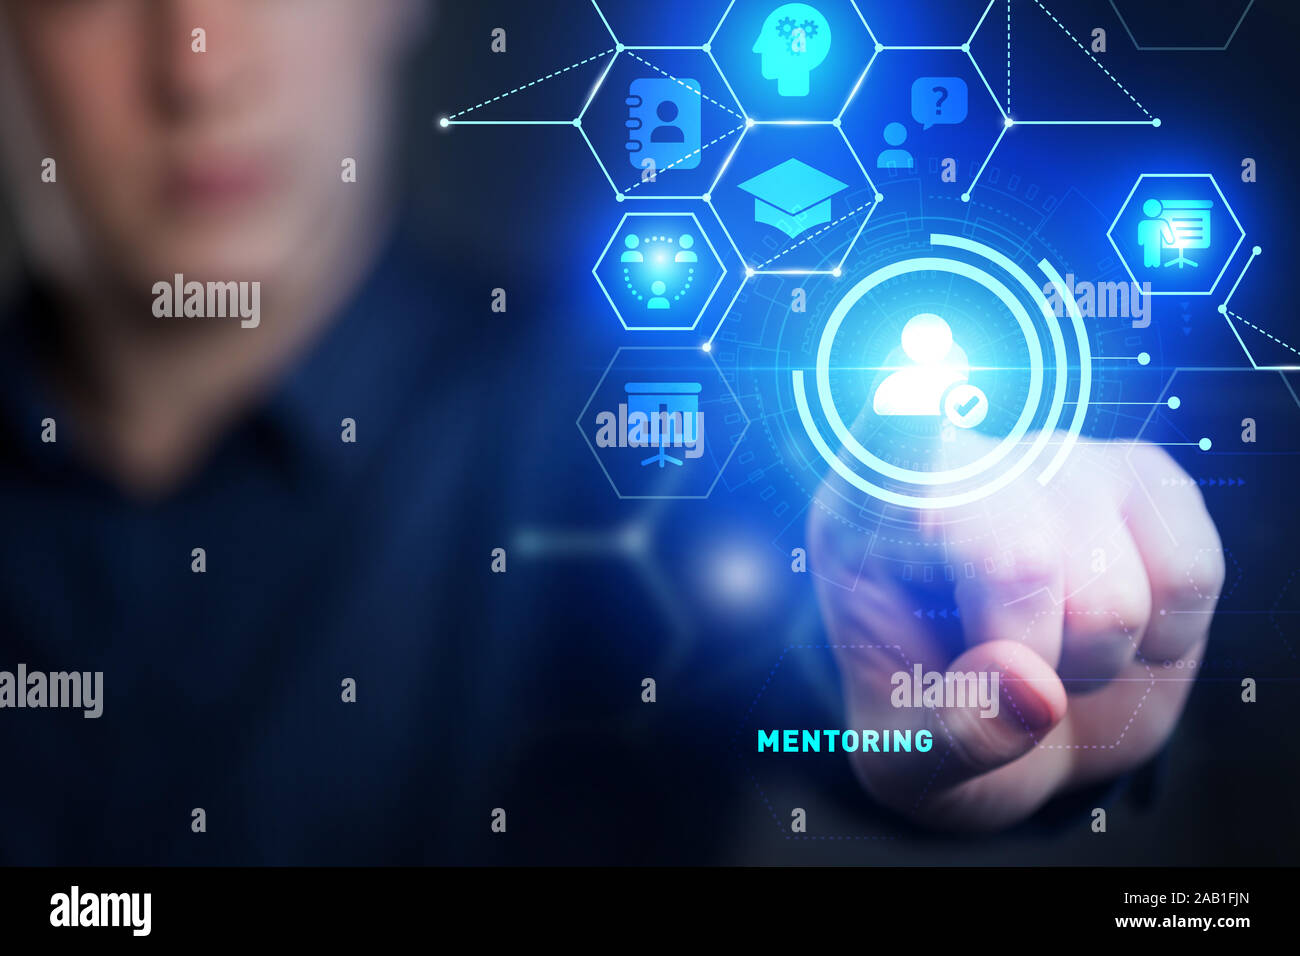 Business, Technology, Internet and network concept. Coaching mentoring education business training development E-learning concept. Stock Photo